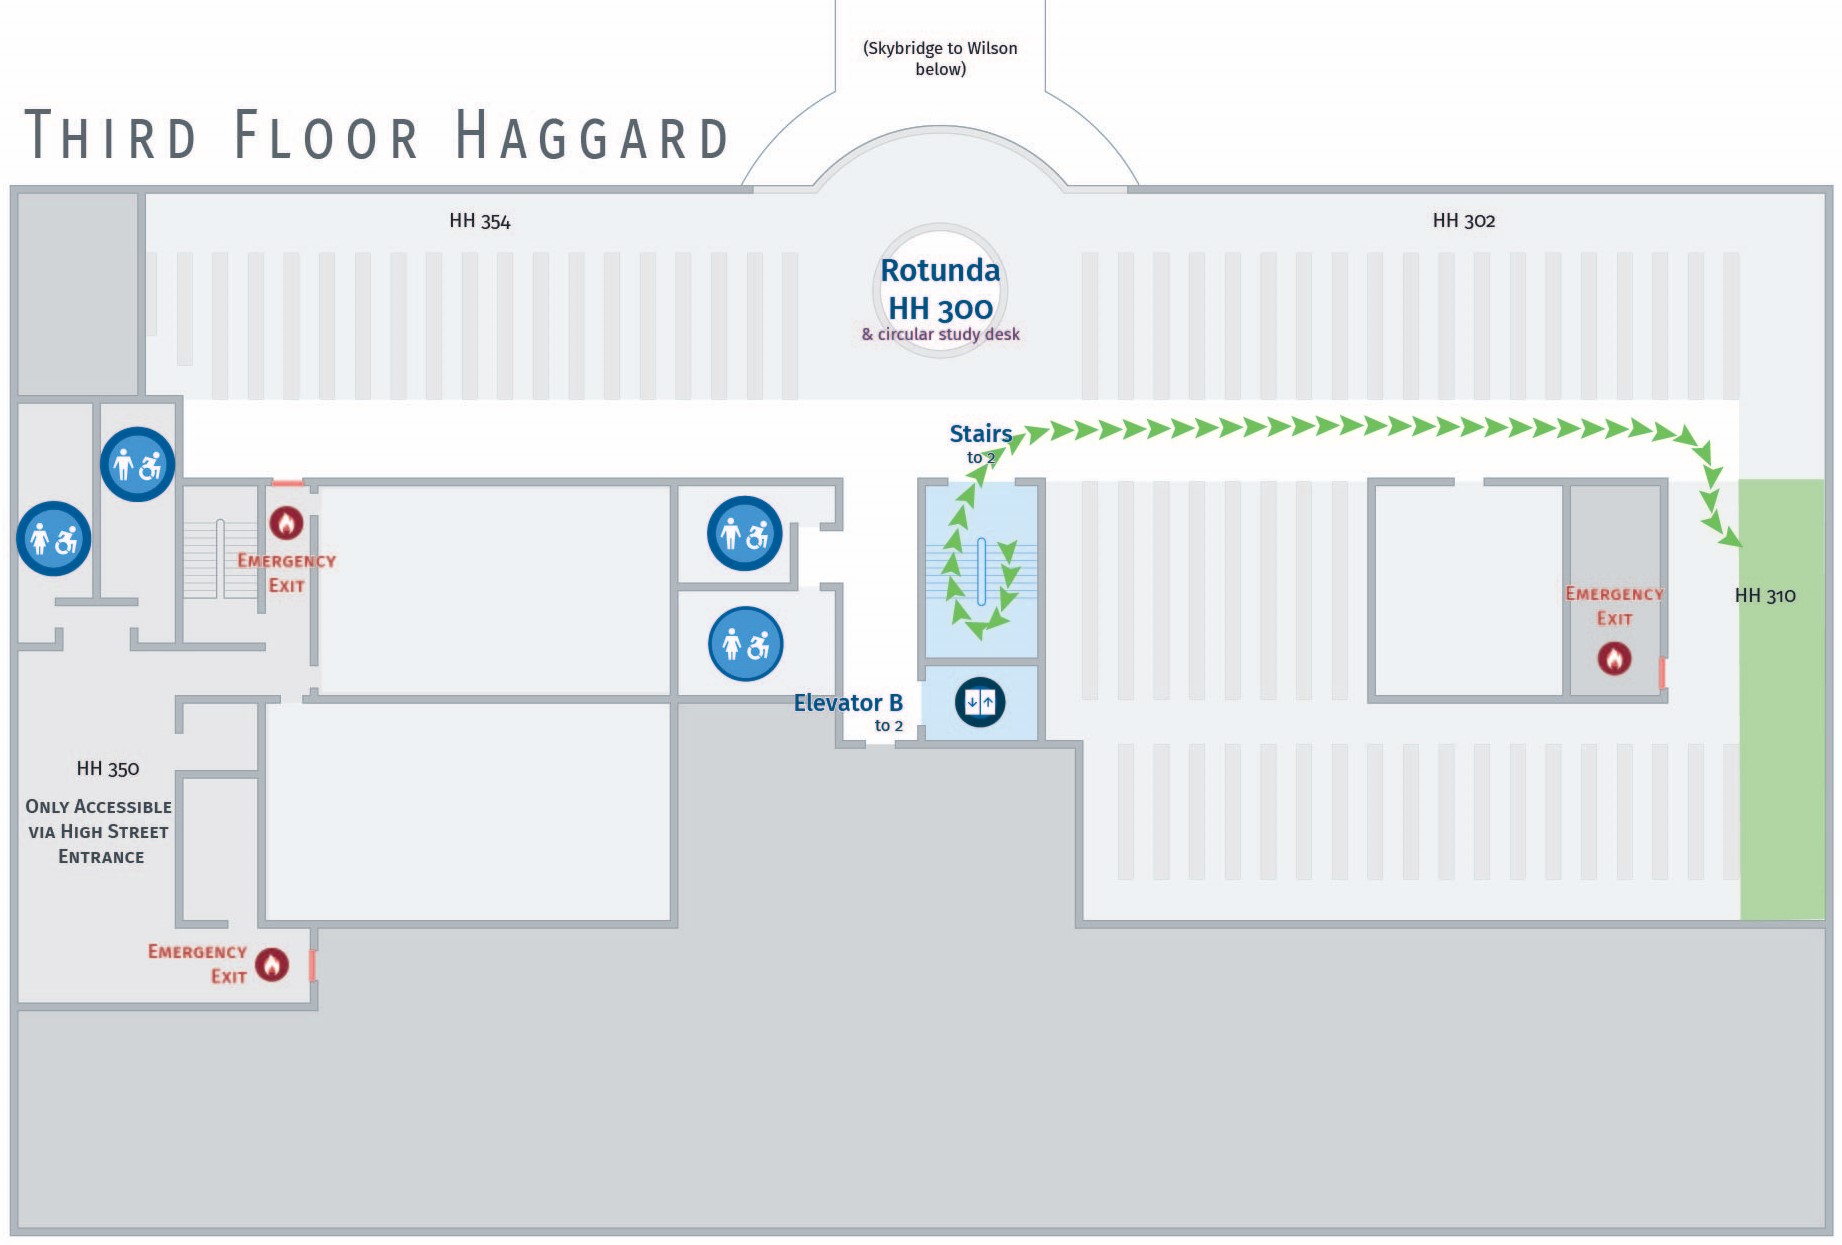 Floor plan, third floor of Haggard with path to HH 310.